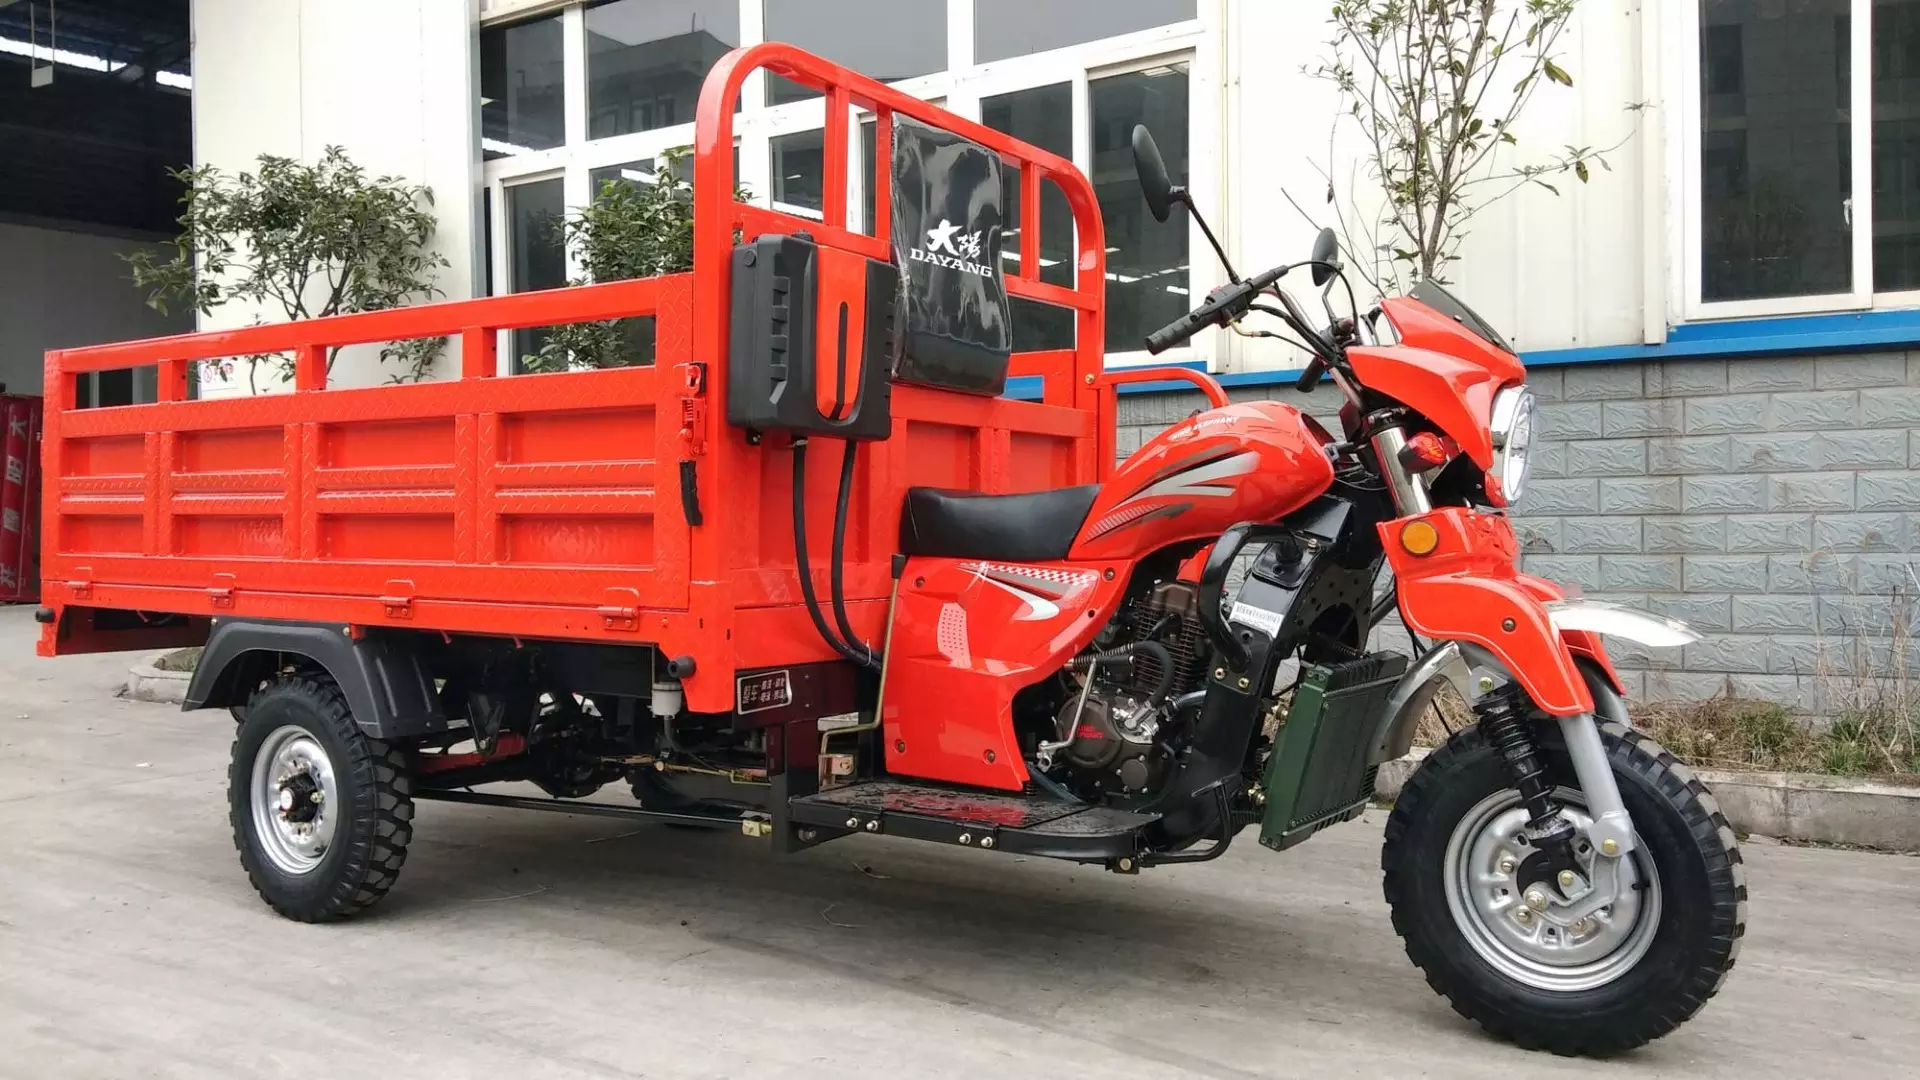 DAYANG lifan  high-power engine fuel oil tanzania motor tricycle for sale open cargo motor tricycle